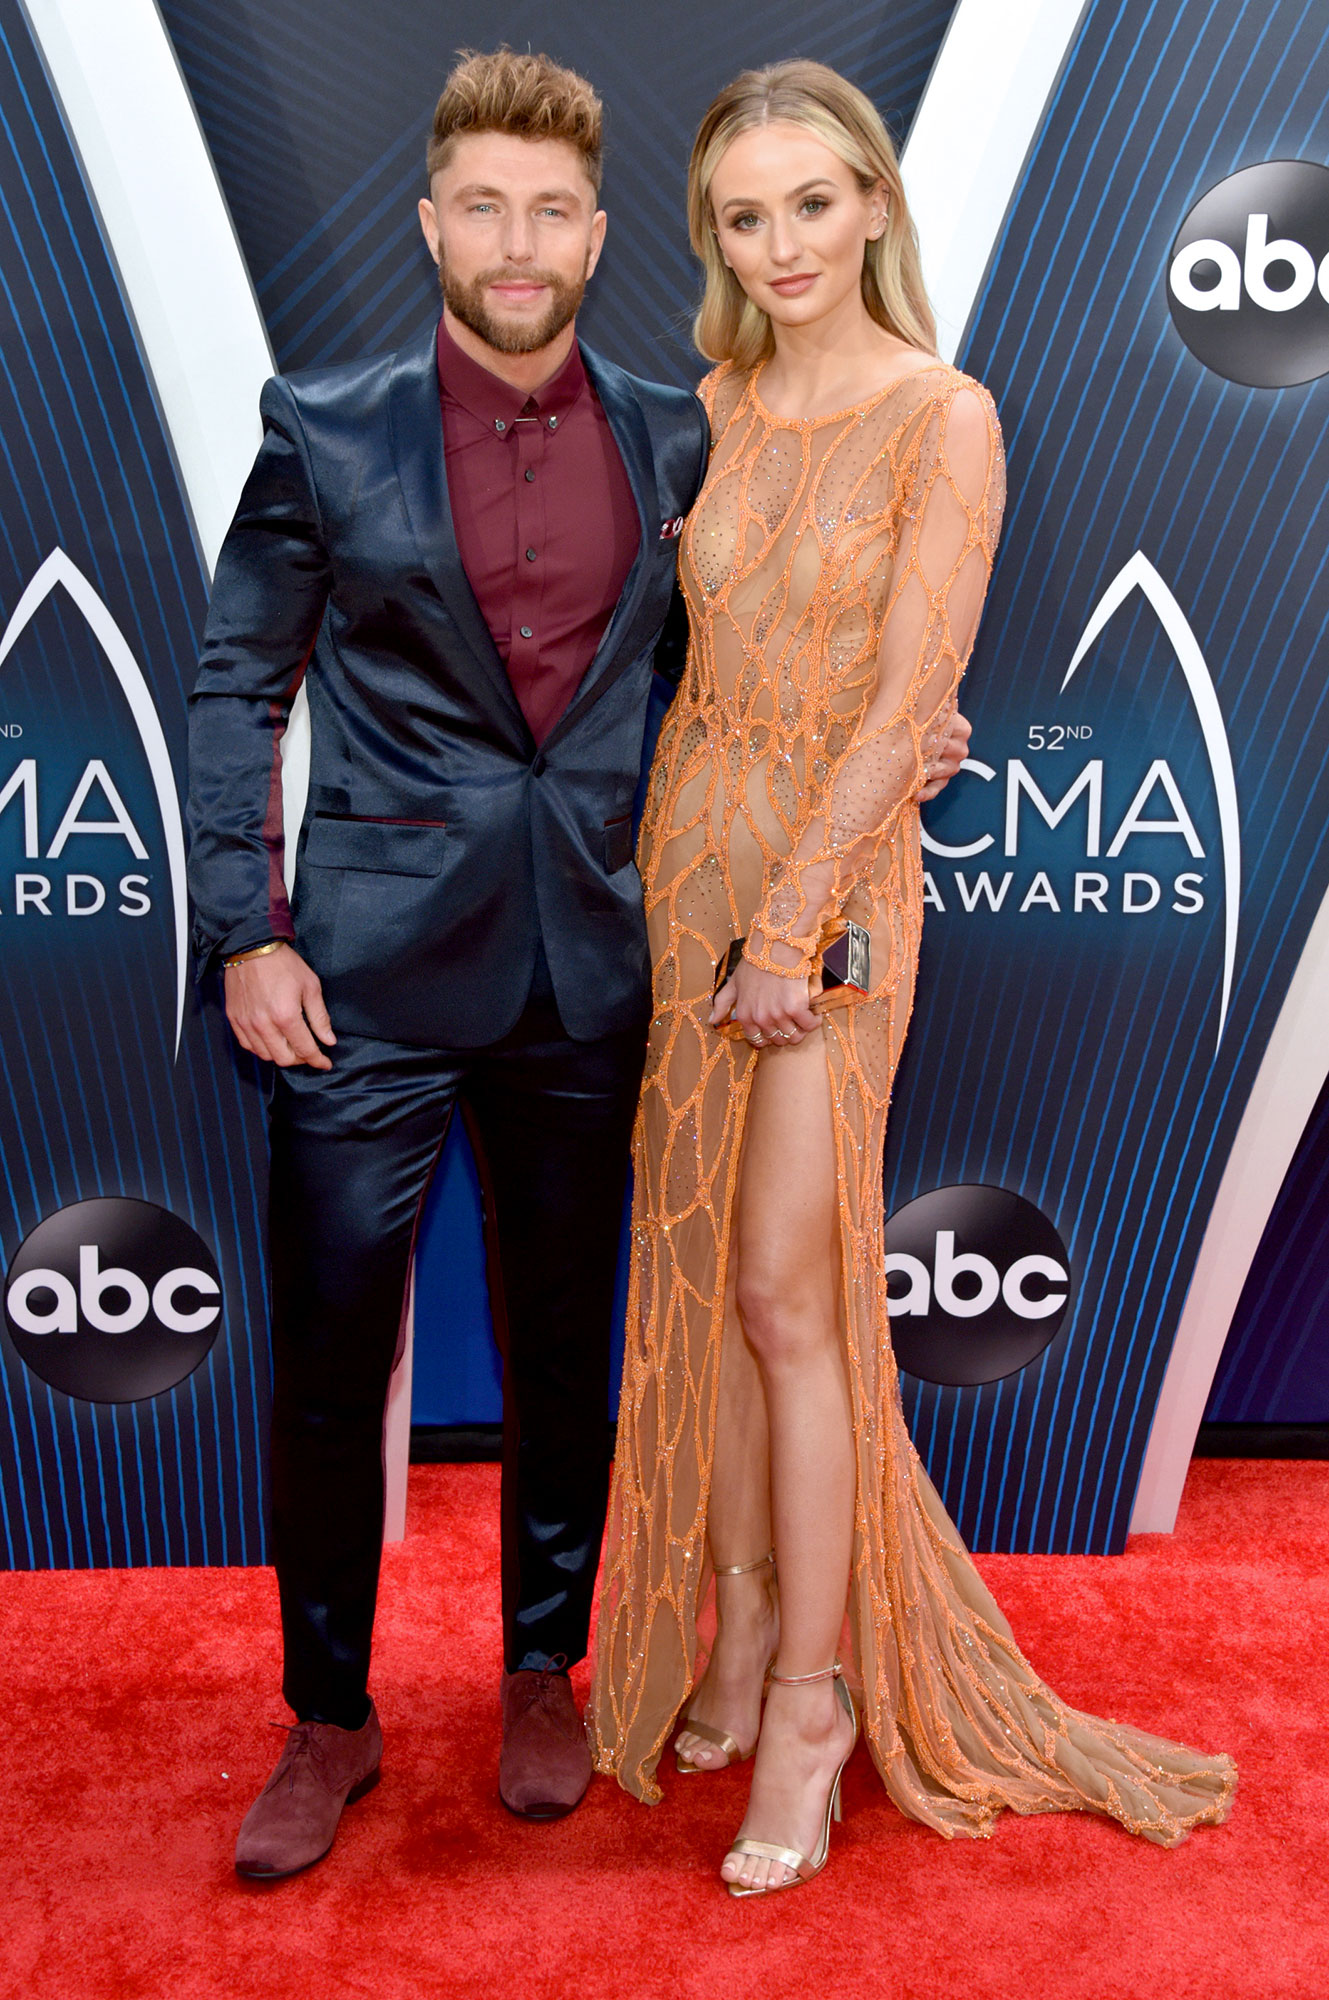 Country Couple Lauren Bushnell and Chris Lane